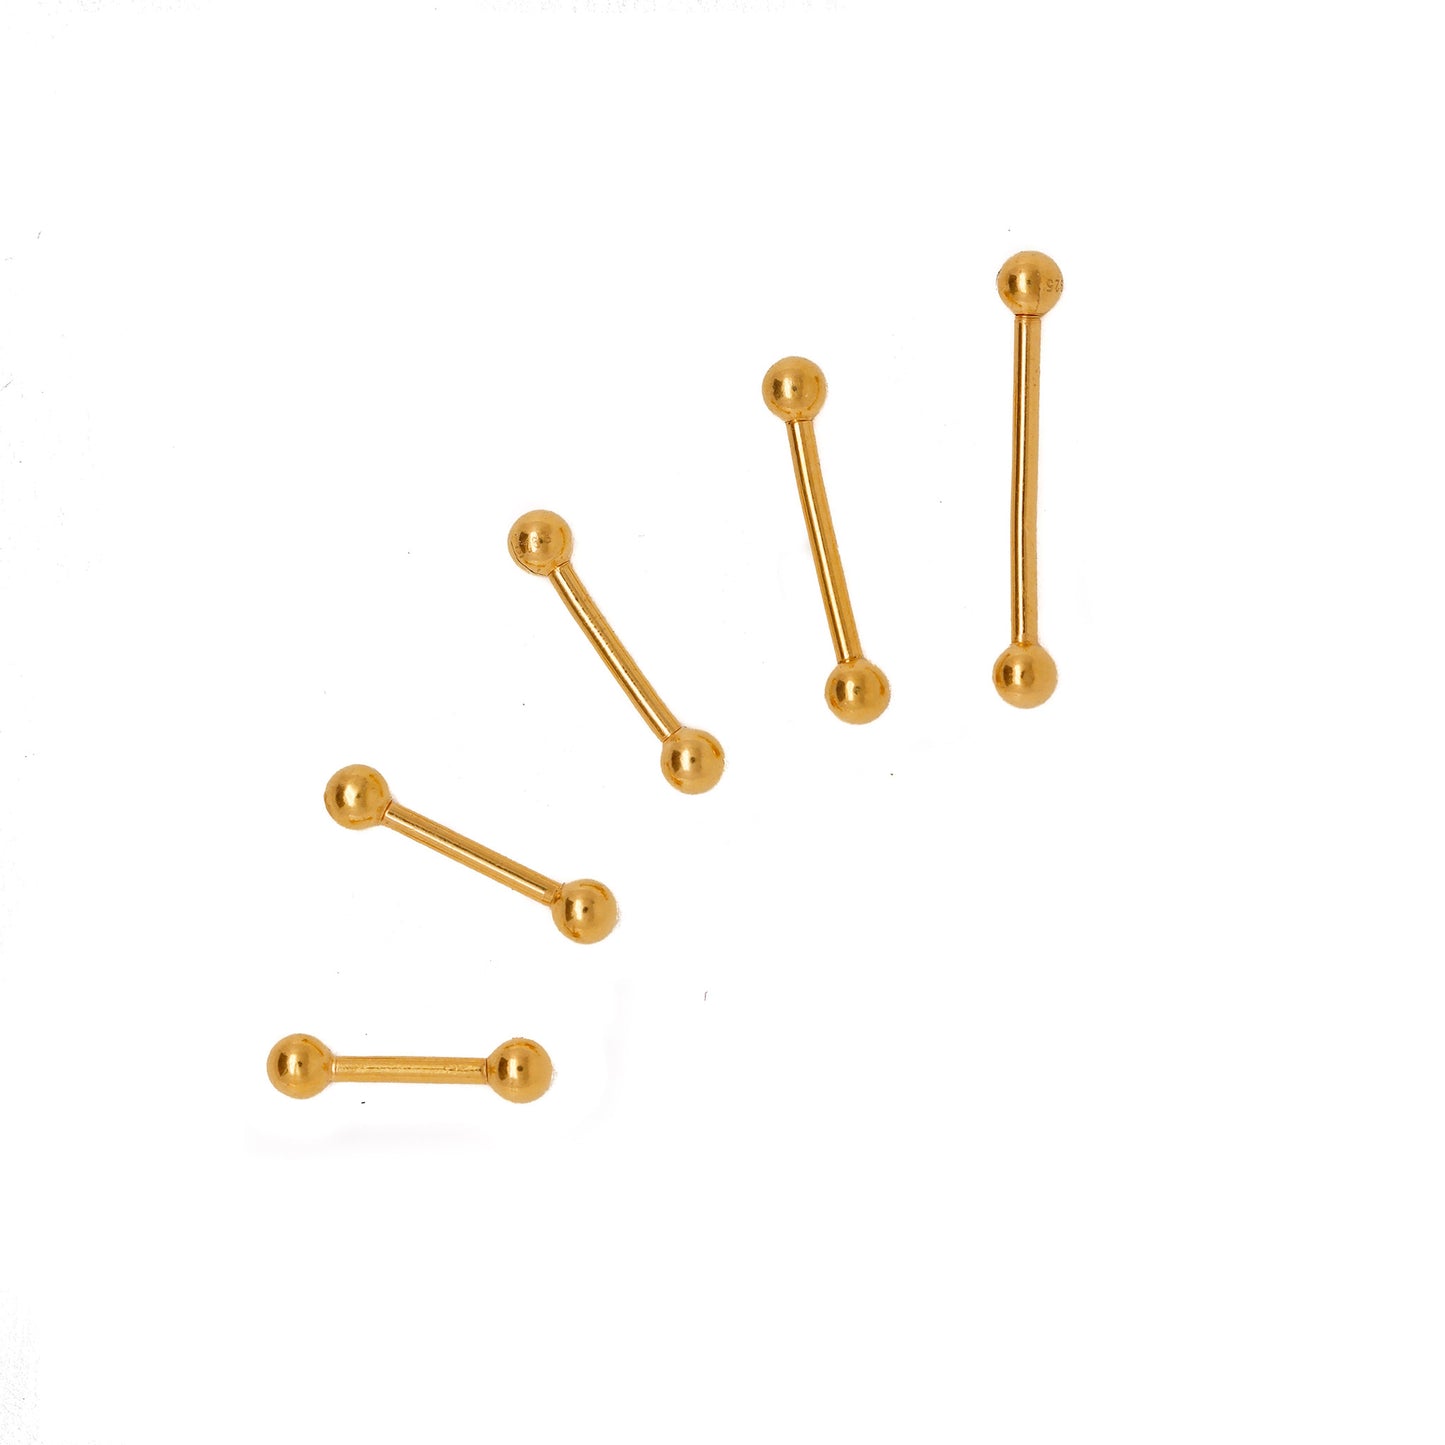 Vermeil | 925 Silver 24k Gold Coated 16G 3mm Straight Barbell | Eyebrow | Nipple | Ear 6mm 1/4" 8mm 5/16" 10mm 3/8" 12mm 1/2" 14mm 9/16" - Sturdy South